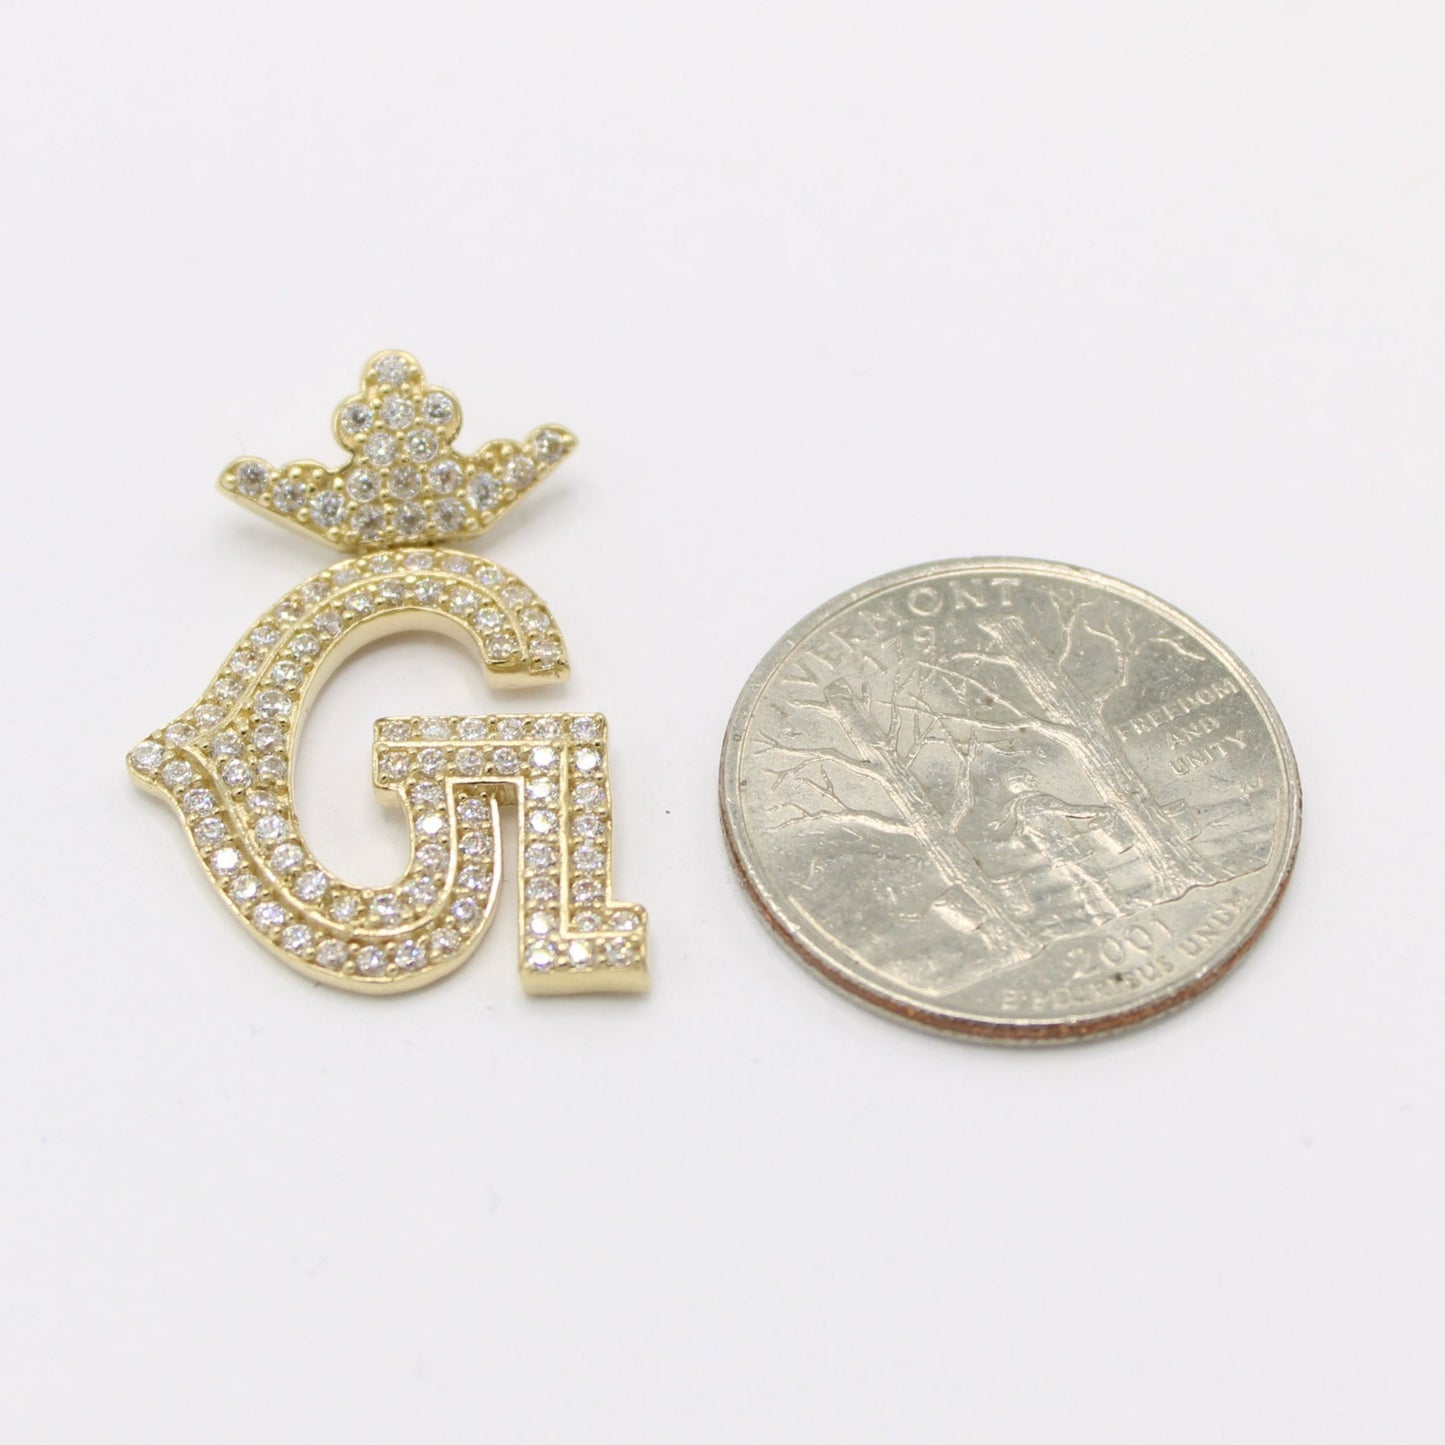 14K  Crown Initial Name ( G ) Cz Stones Yellow Gold